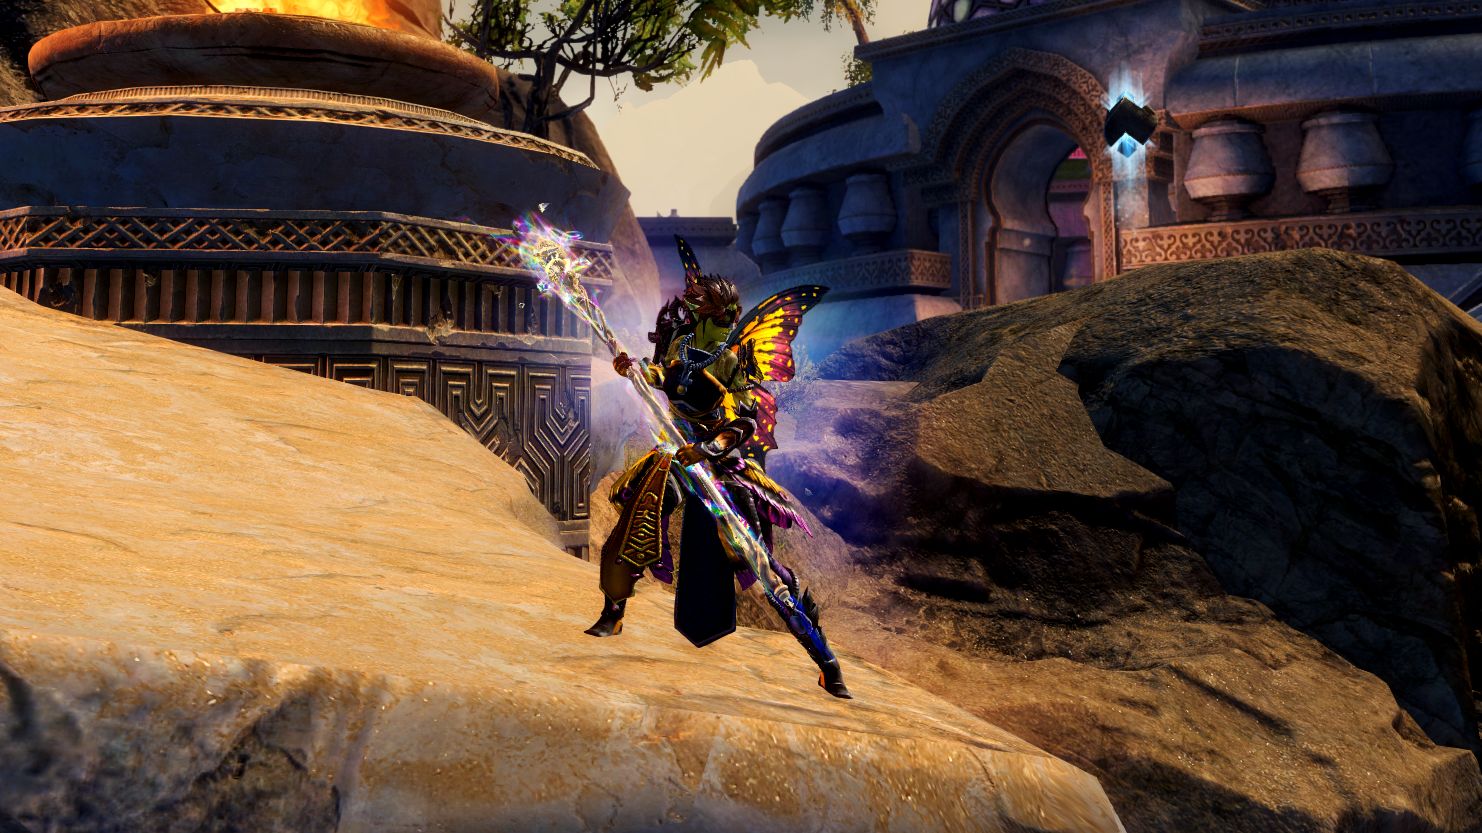 A Guild Wars 2 character holding the rainbow staff Bifrost